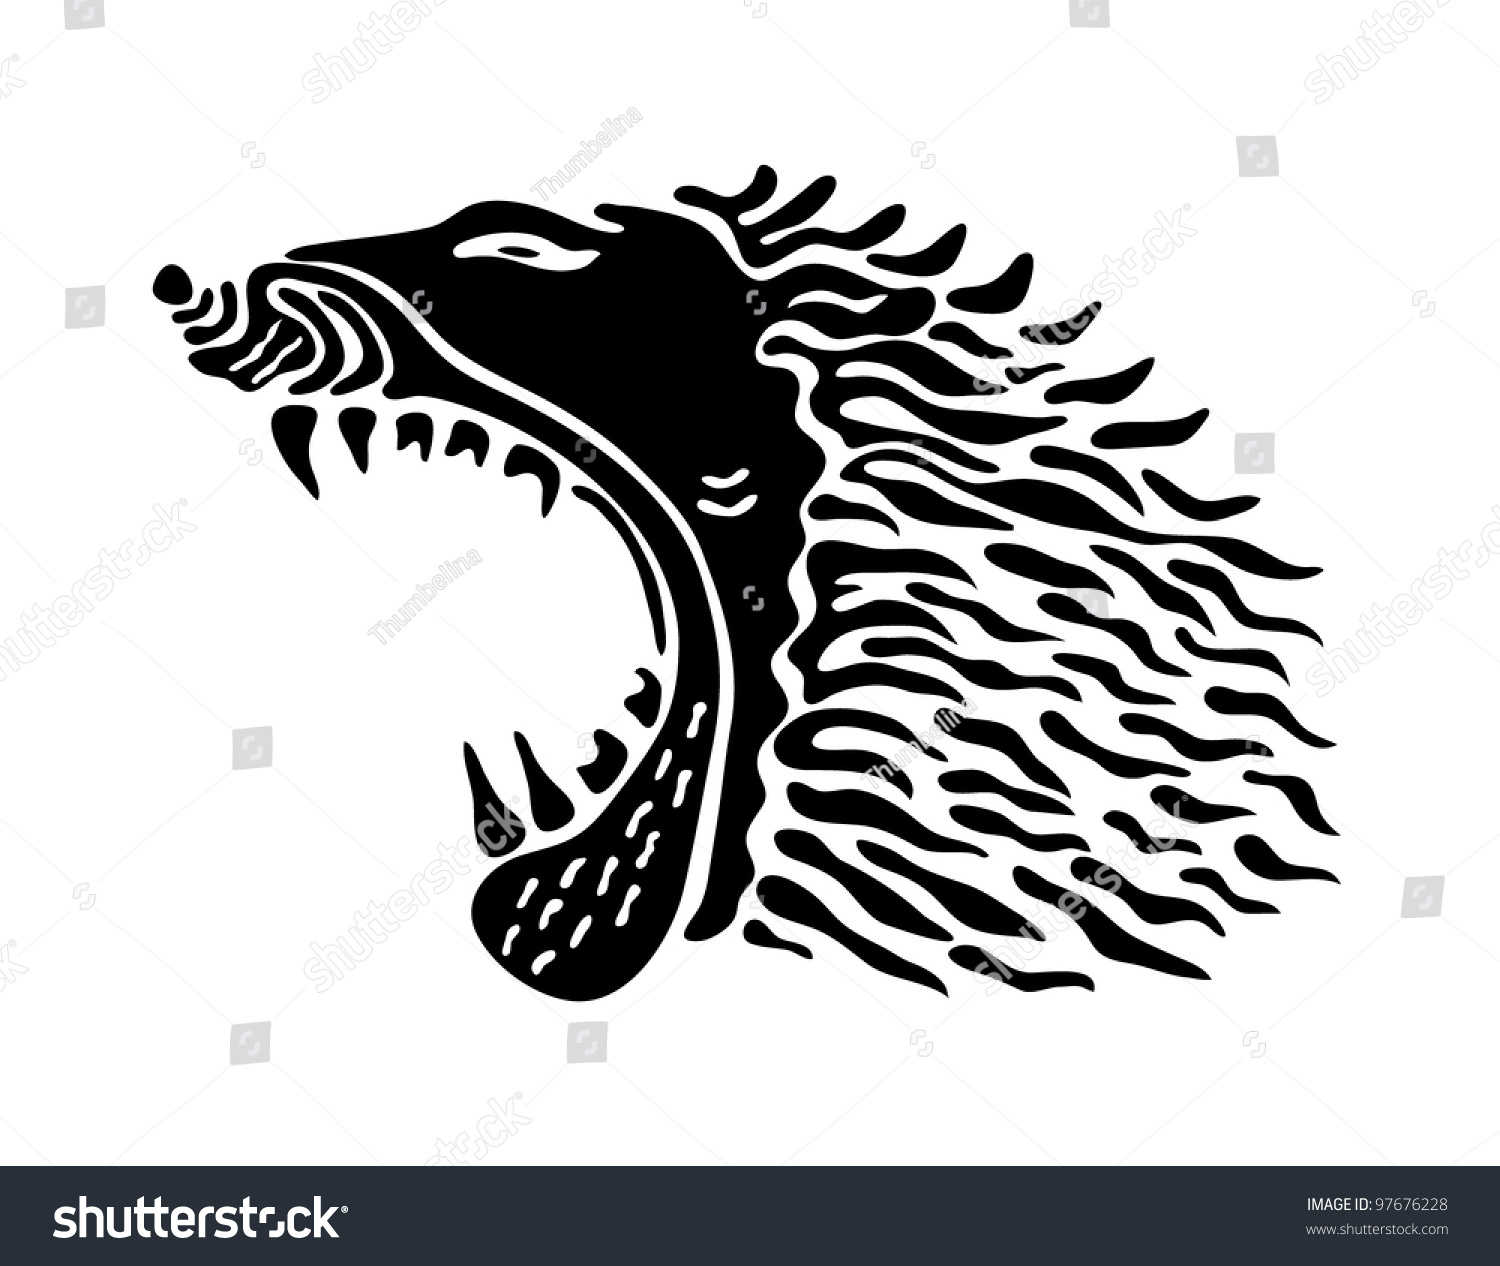 Tattoo Lion Opened Mouth Stock Vector 97676228 - Shutterstock